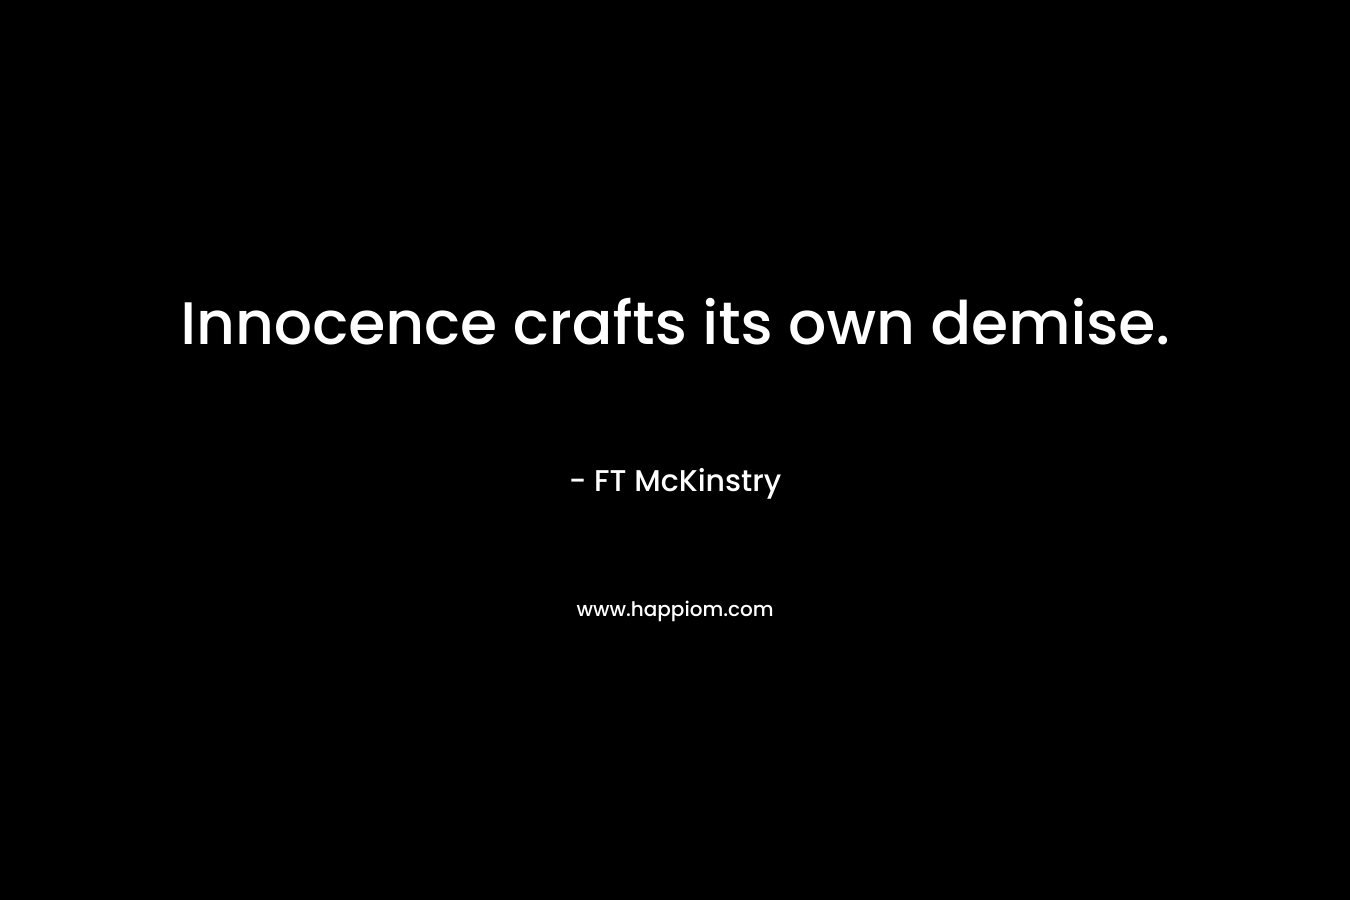 Innocence crafts its own demise. – FT McKinstry